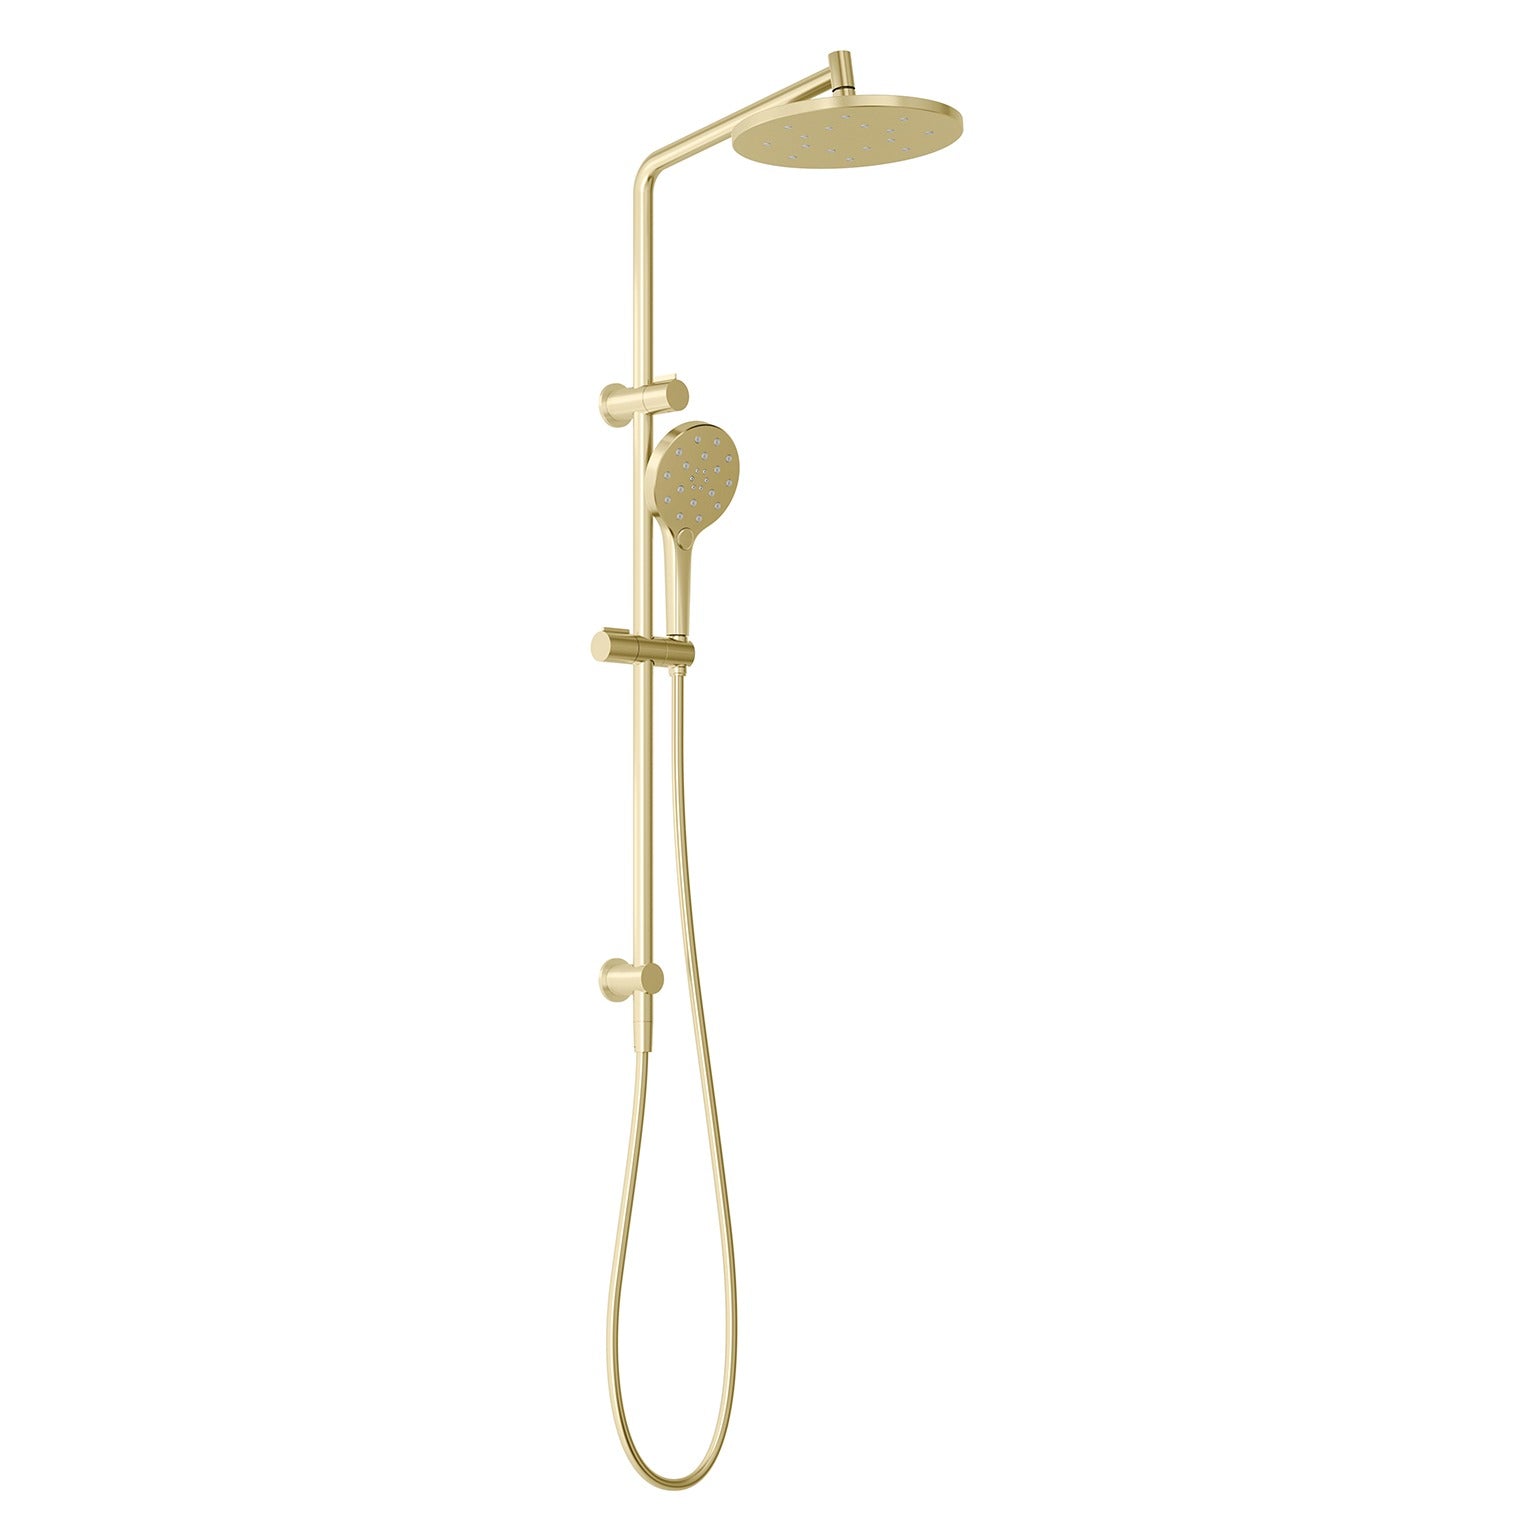 PHOENIX ORMOND TWIN SHOWER BRUSHED GOLD